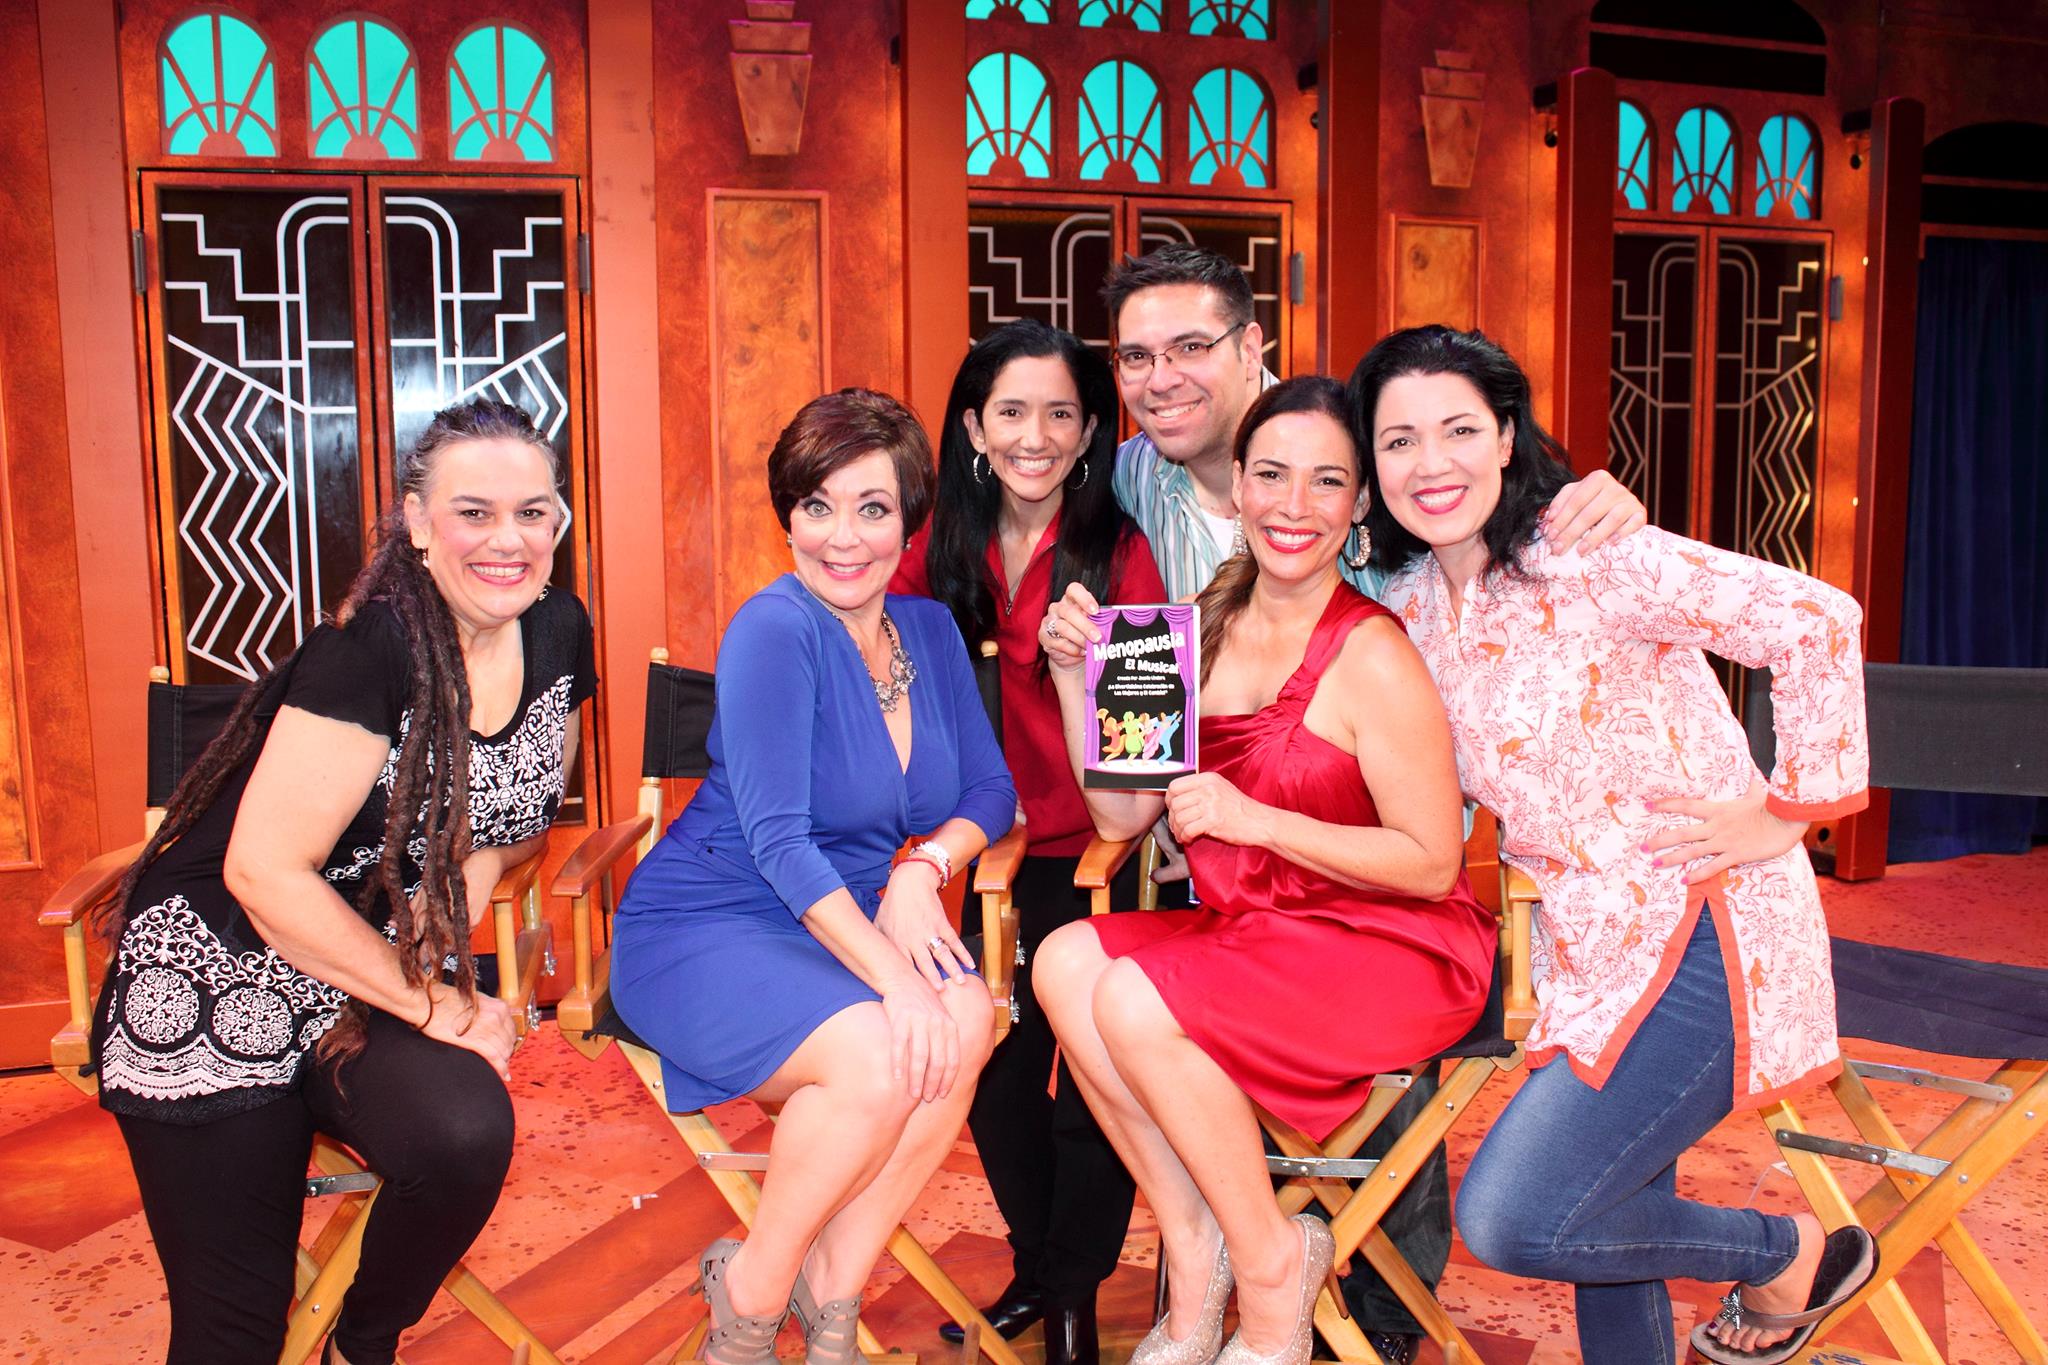 with the Cast of Menopausia el Musical at the Ricardo Montalbán Theatre. 2013 Being Interview by Kelly and Aaron show.